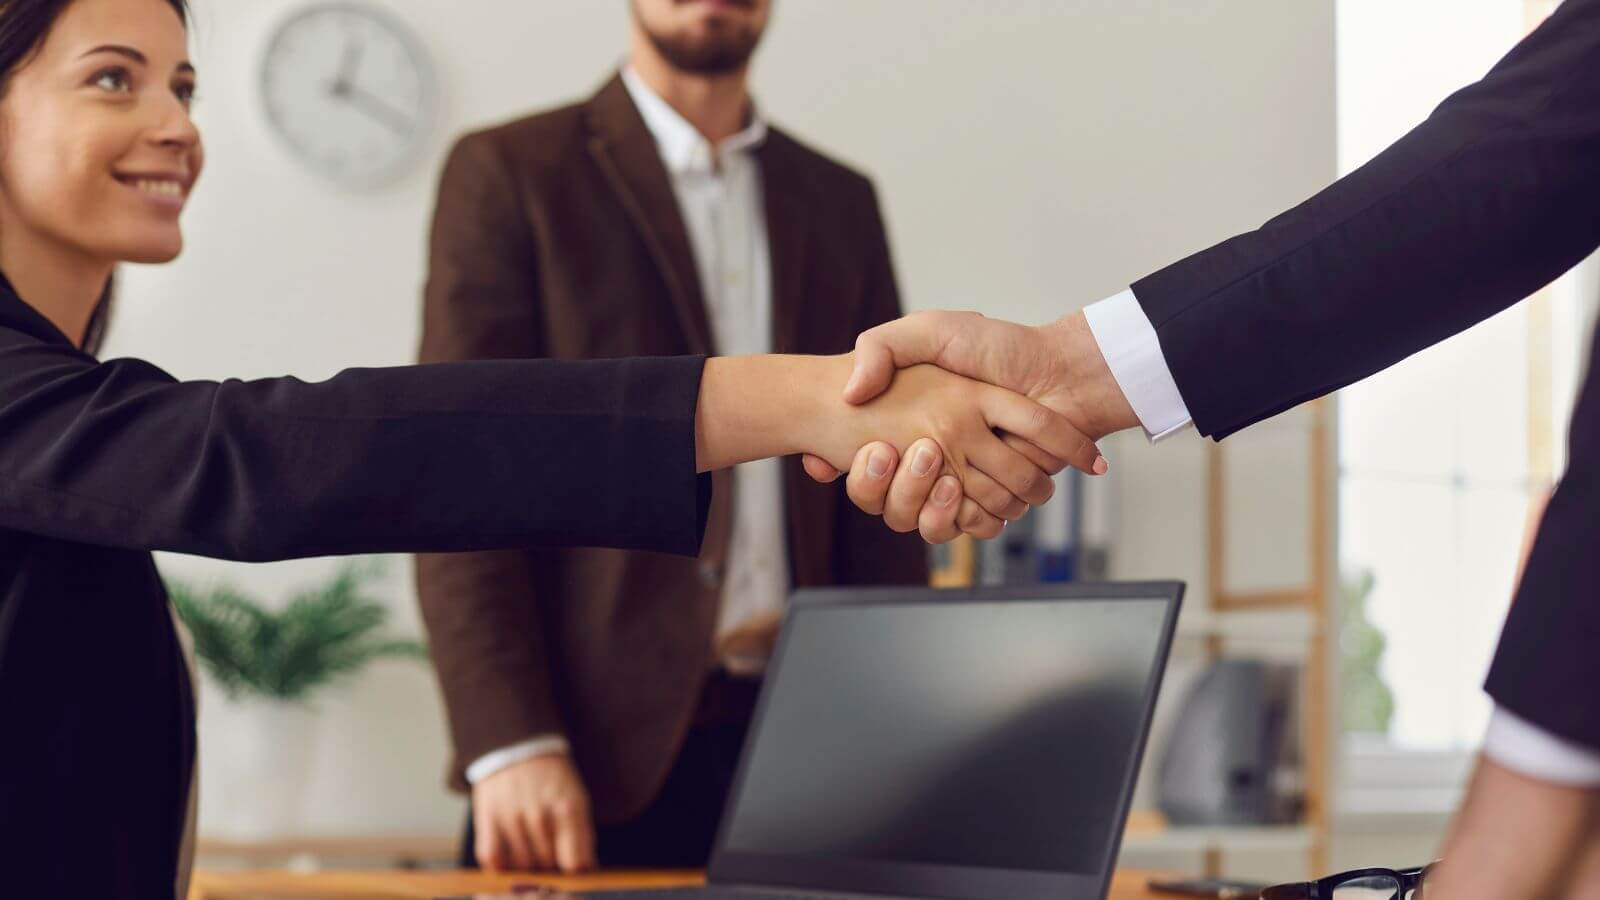 two people shaking hands after a negotiation